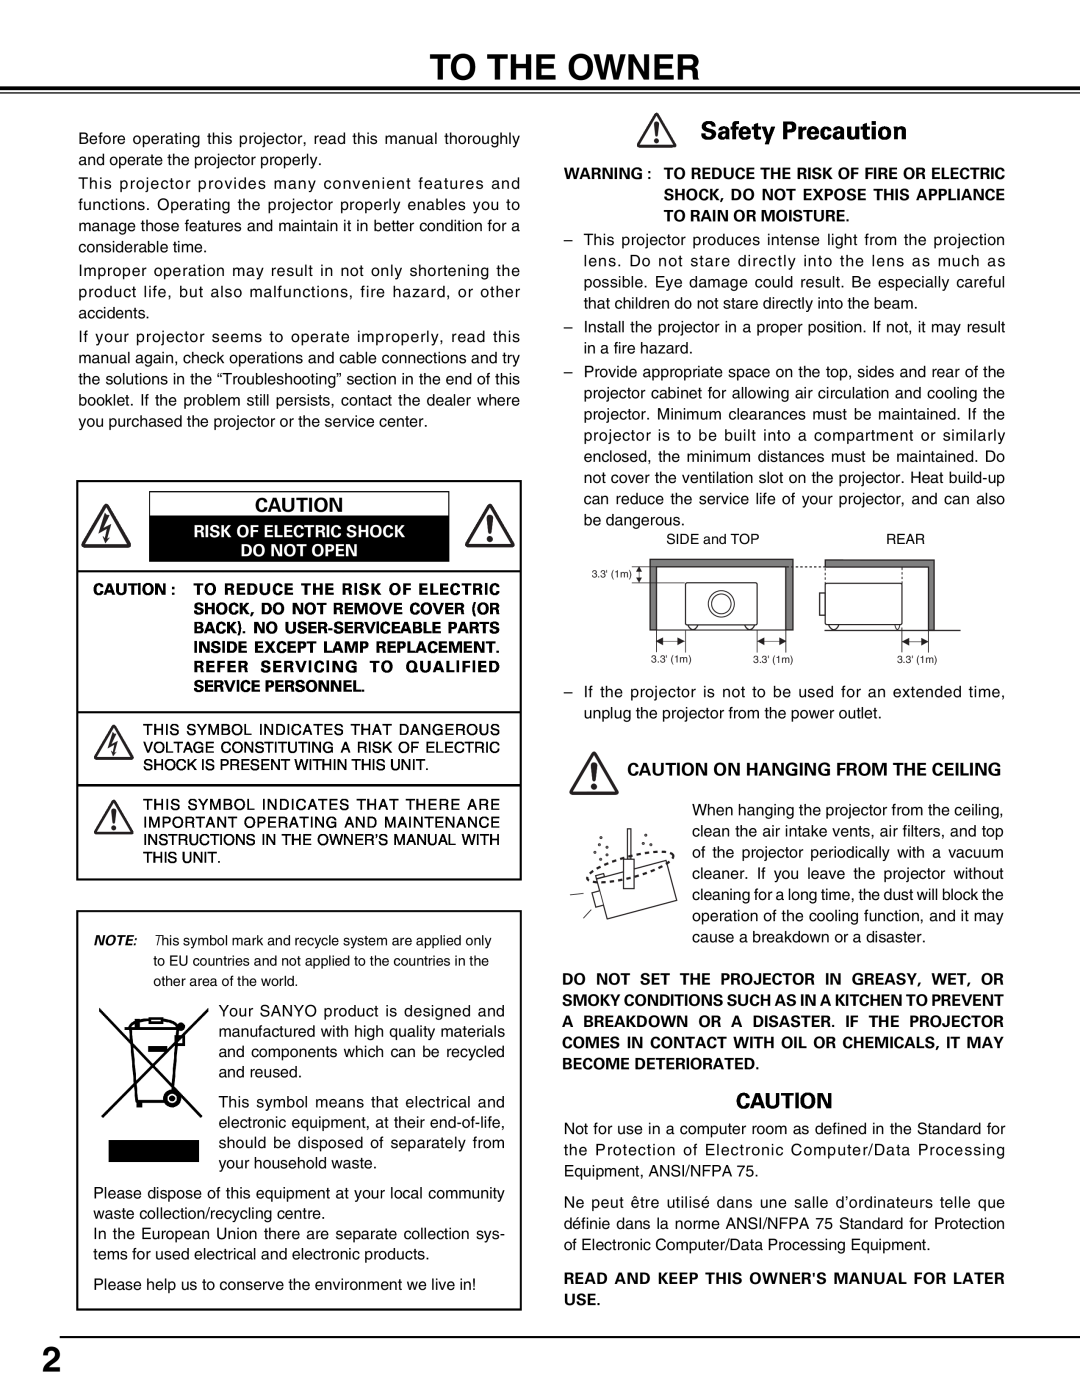 Sanyo PLV75L/PLV-80L, PLV-75/PLV-80 owner manual To The Owner, Safety Precaution, Risk Of Electric Shock Do Not Open 